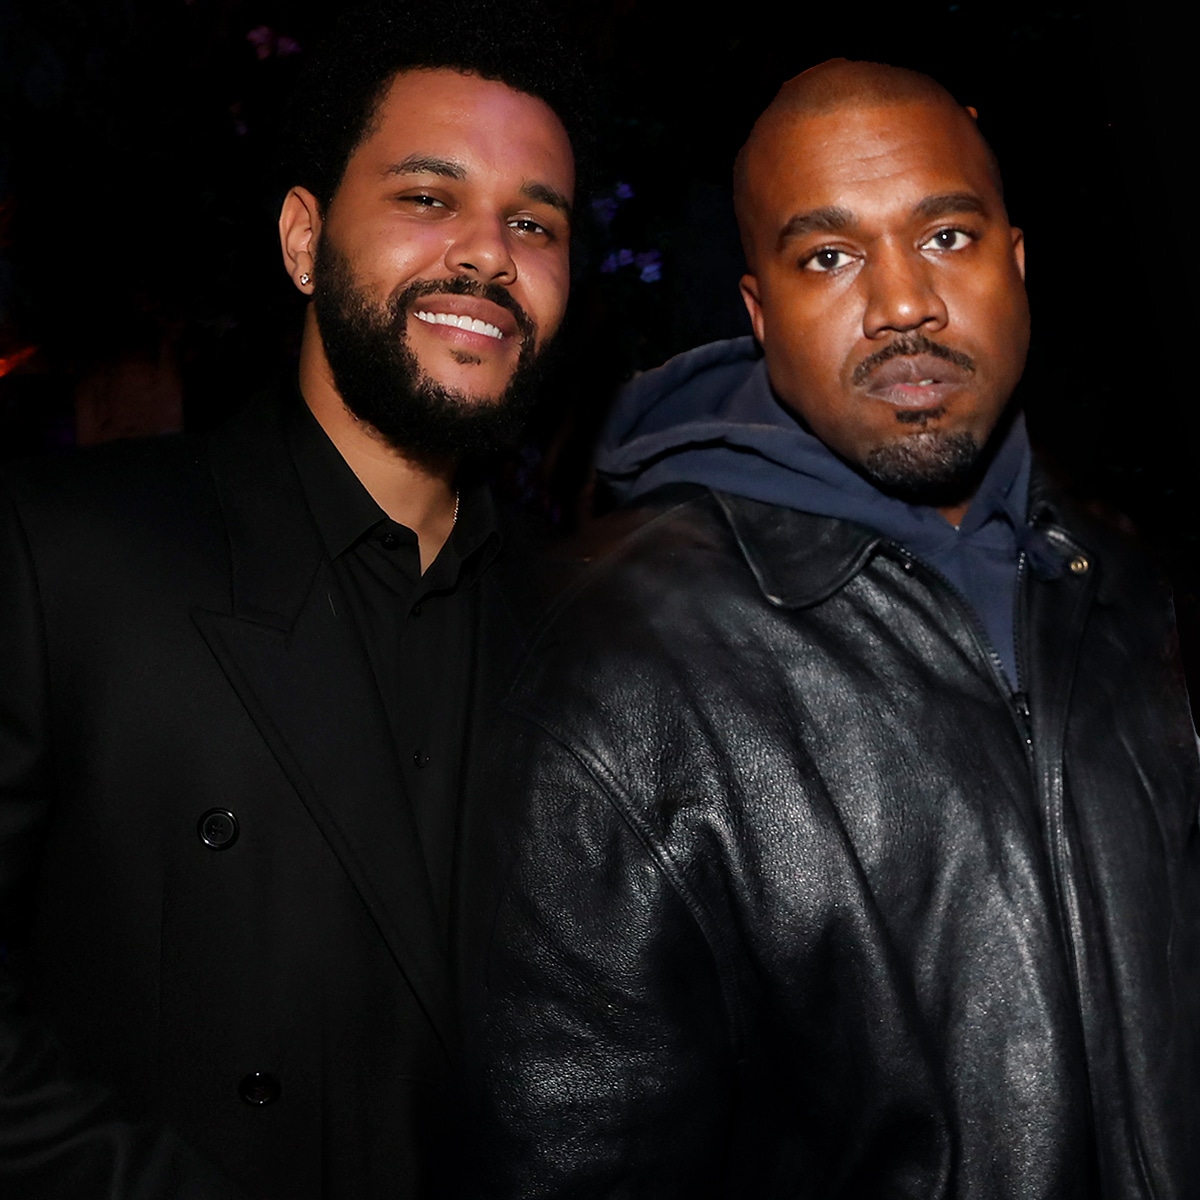 The Weeknd Says He Might “Pull a YE” and Change Name Like Kanye West - E! Online